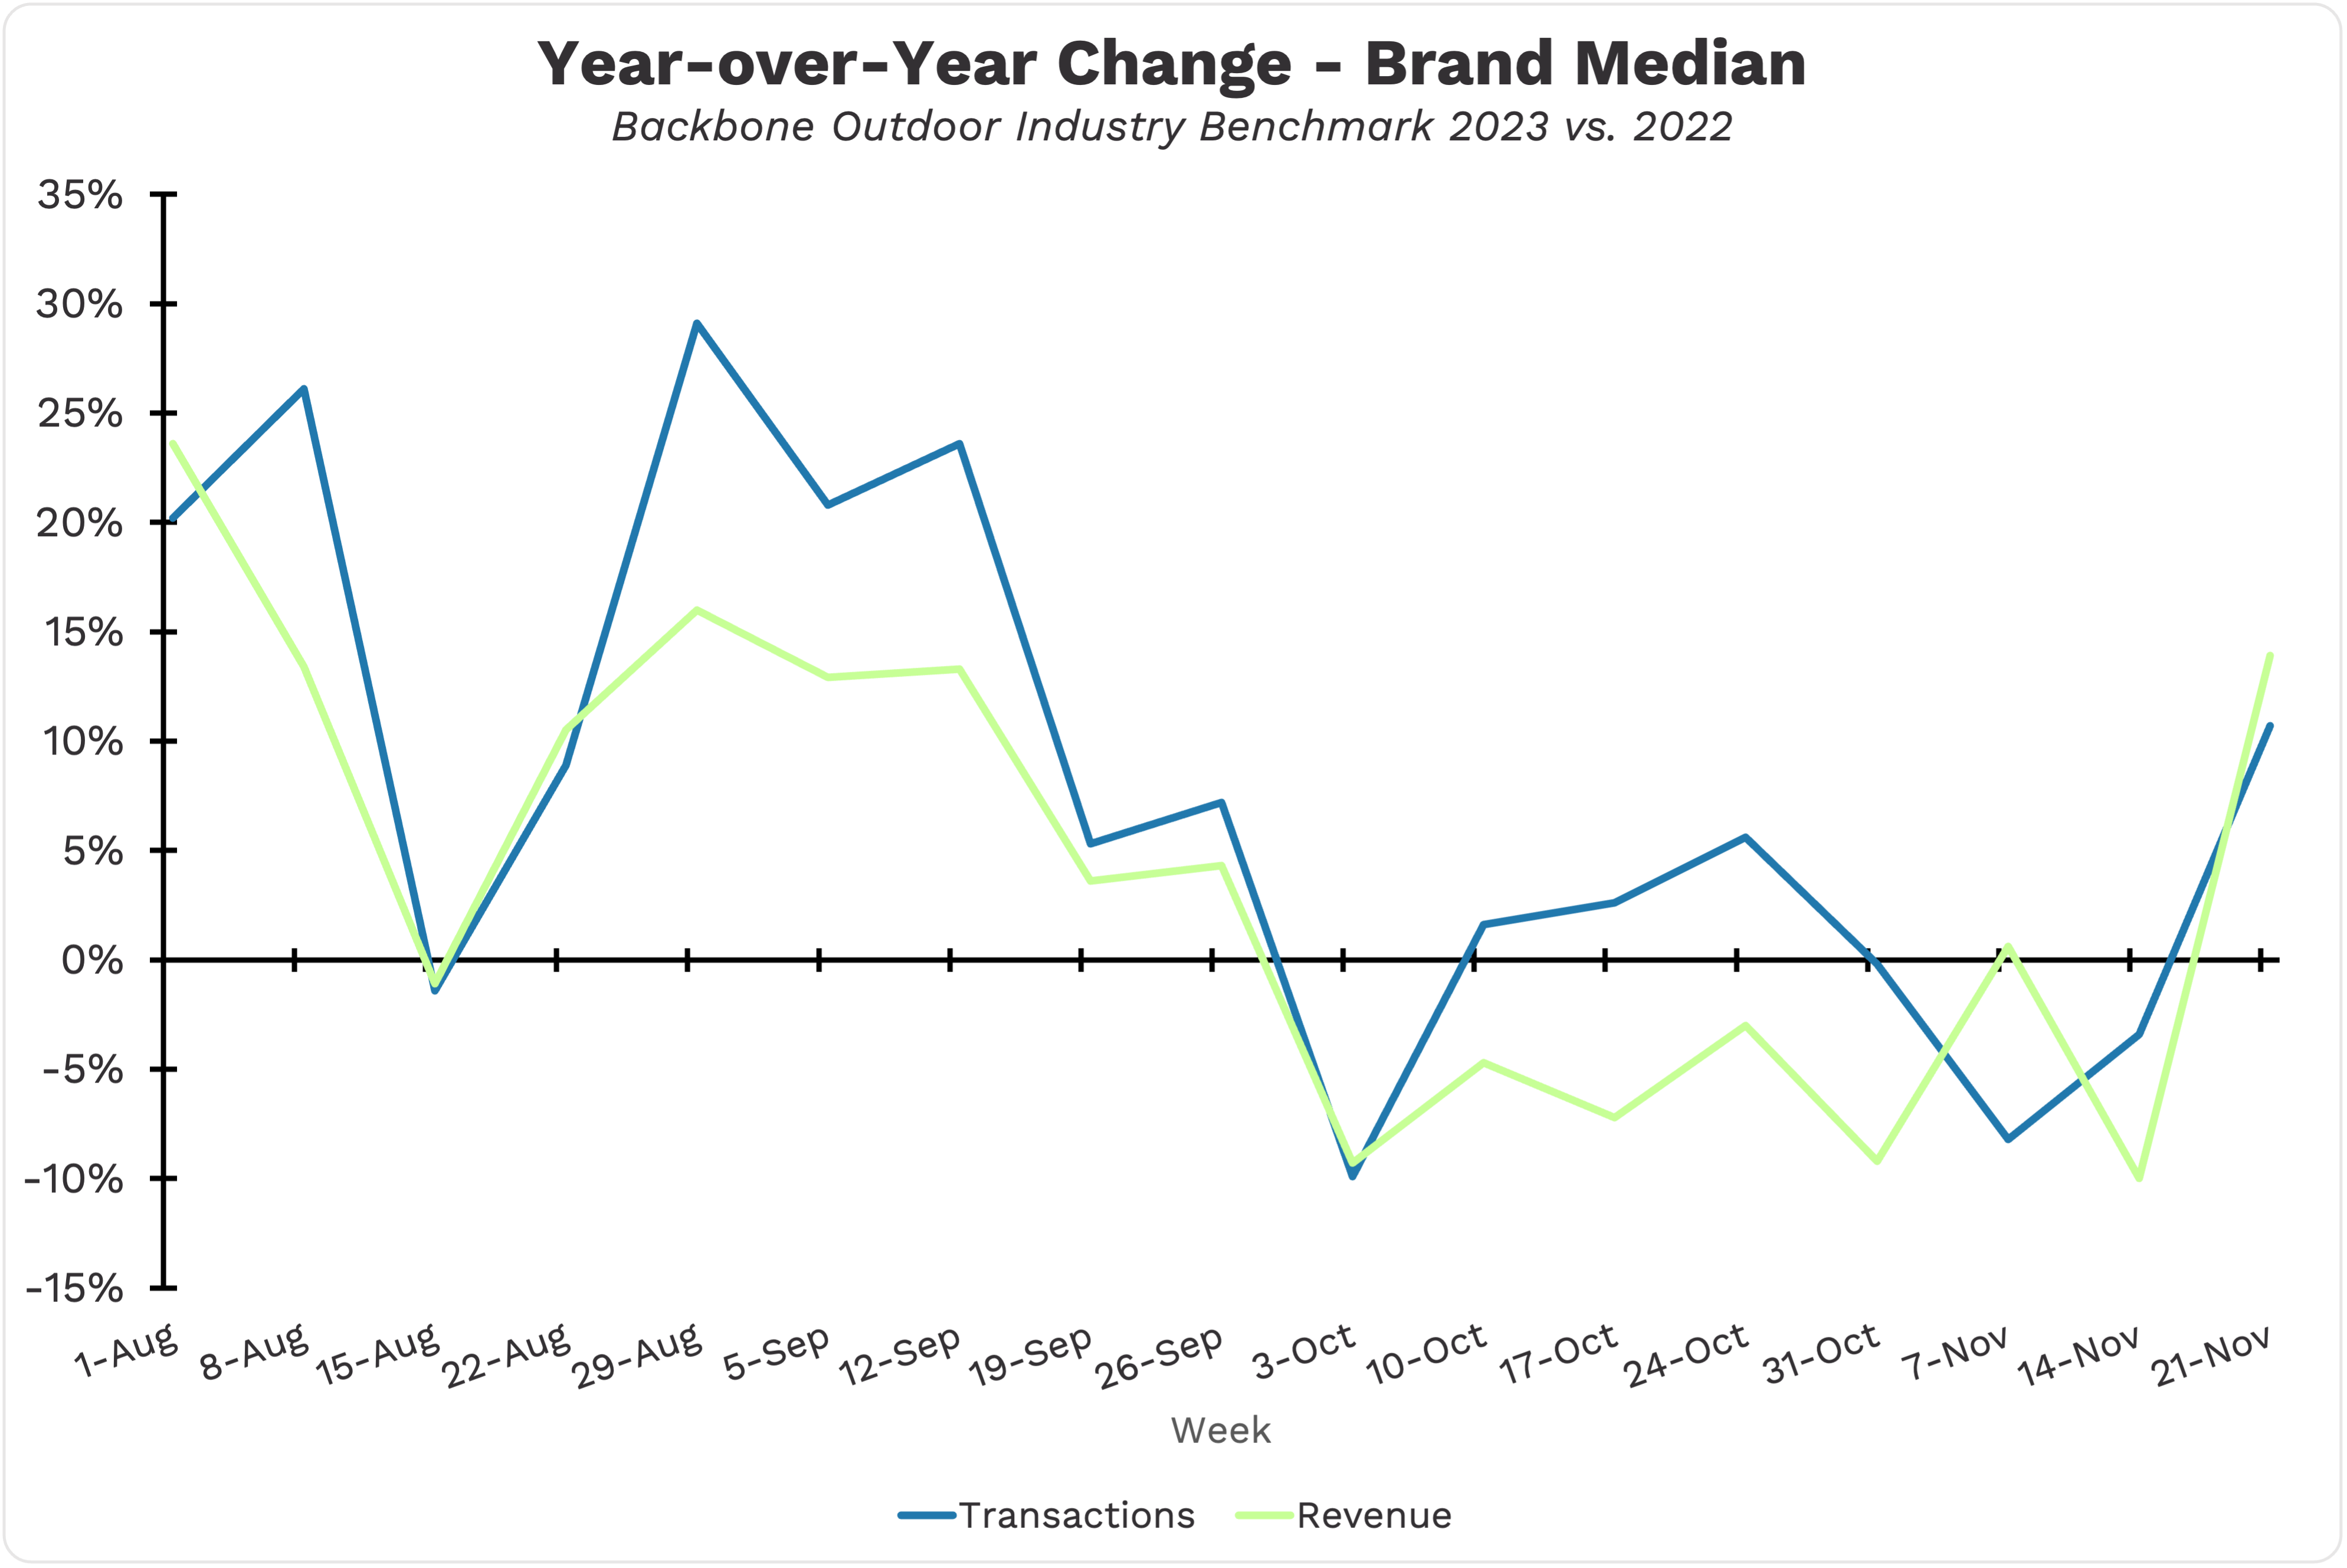 Chart showing year-over-year Cyber Week revenue and transaction change among Backbone clients